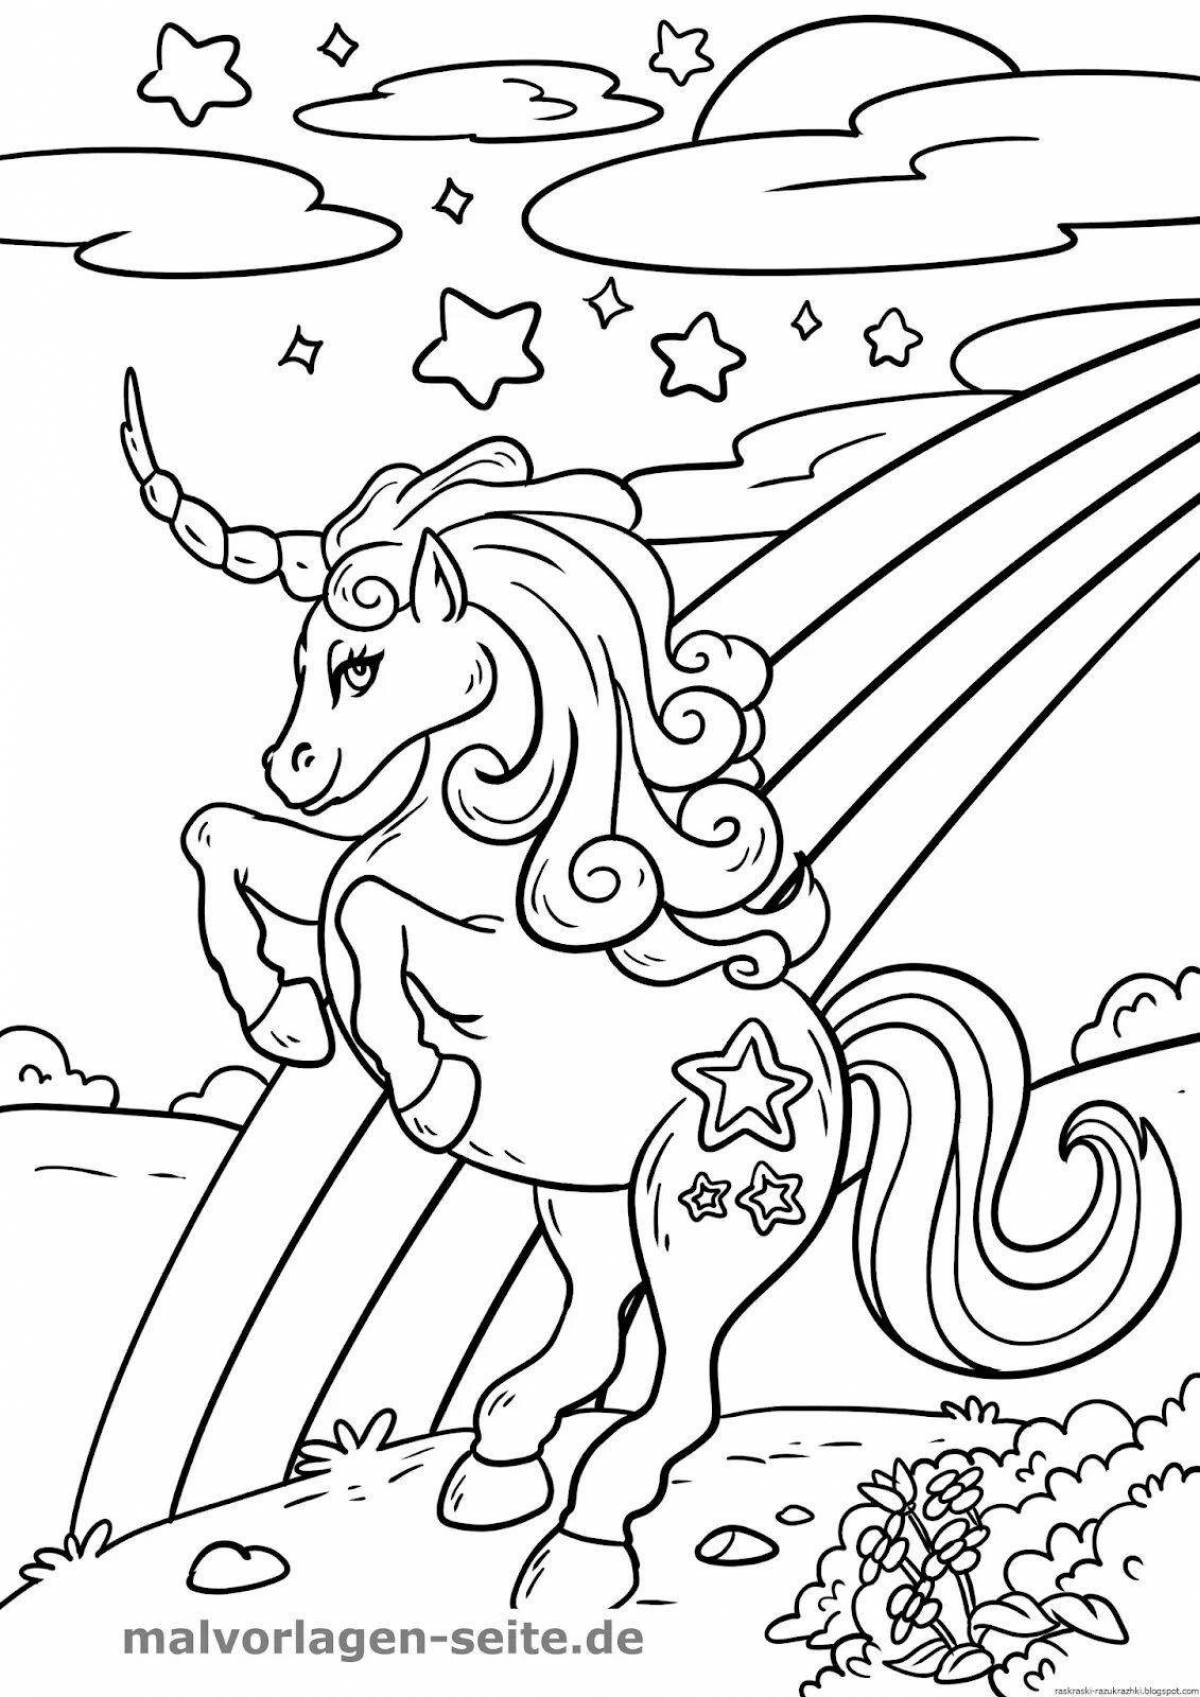 Coloring book for girls with unicorn print